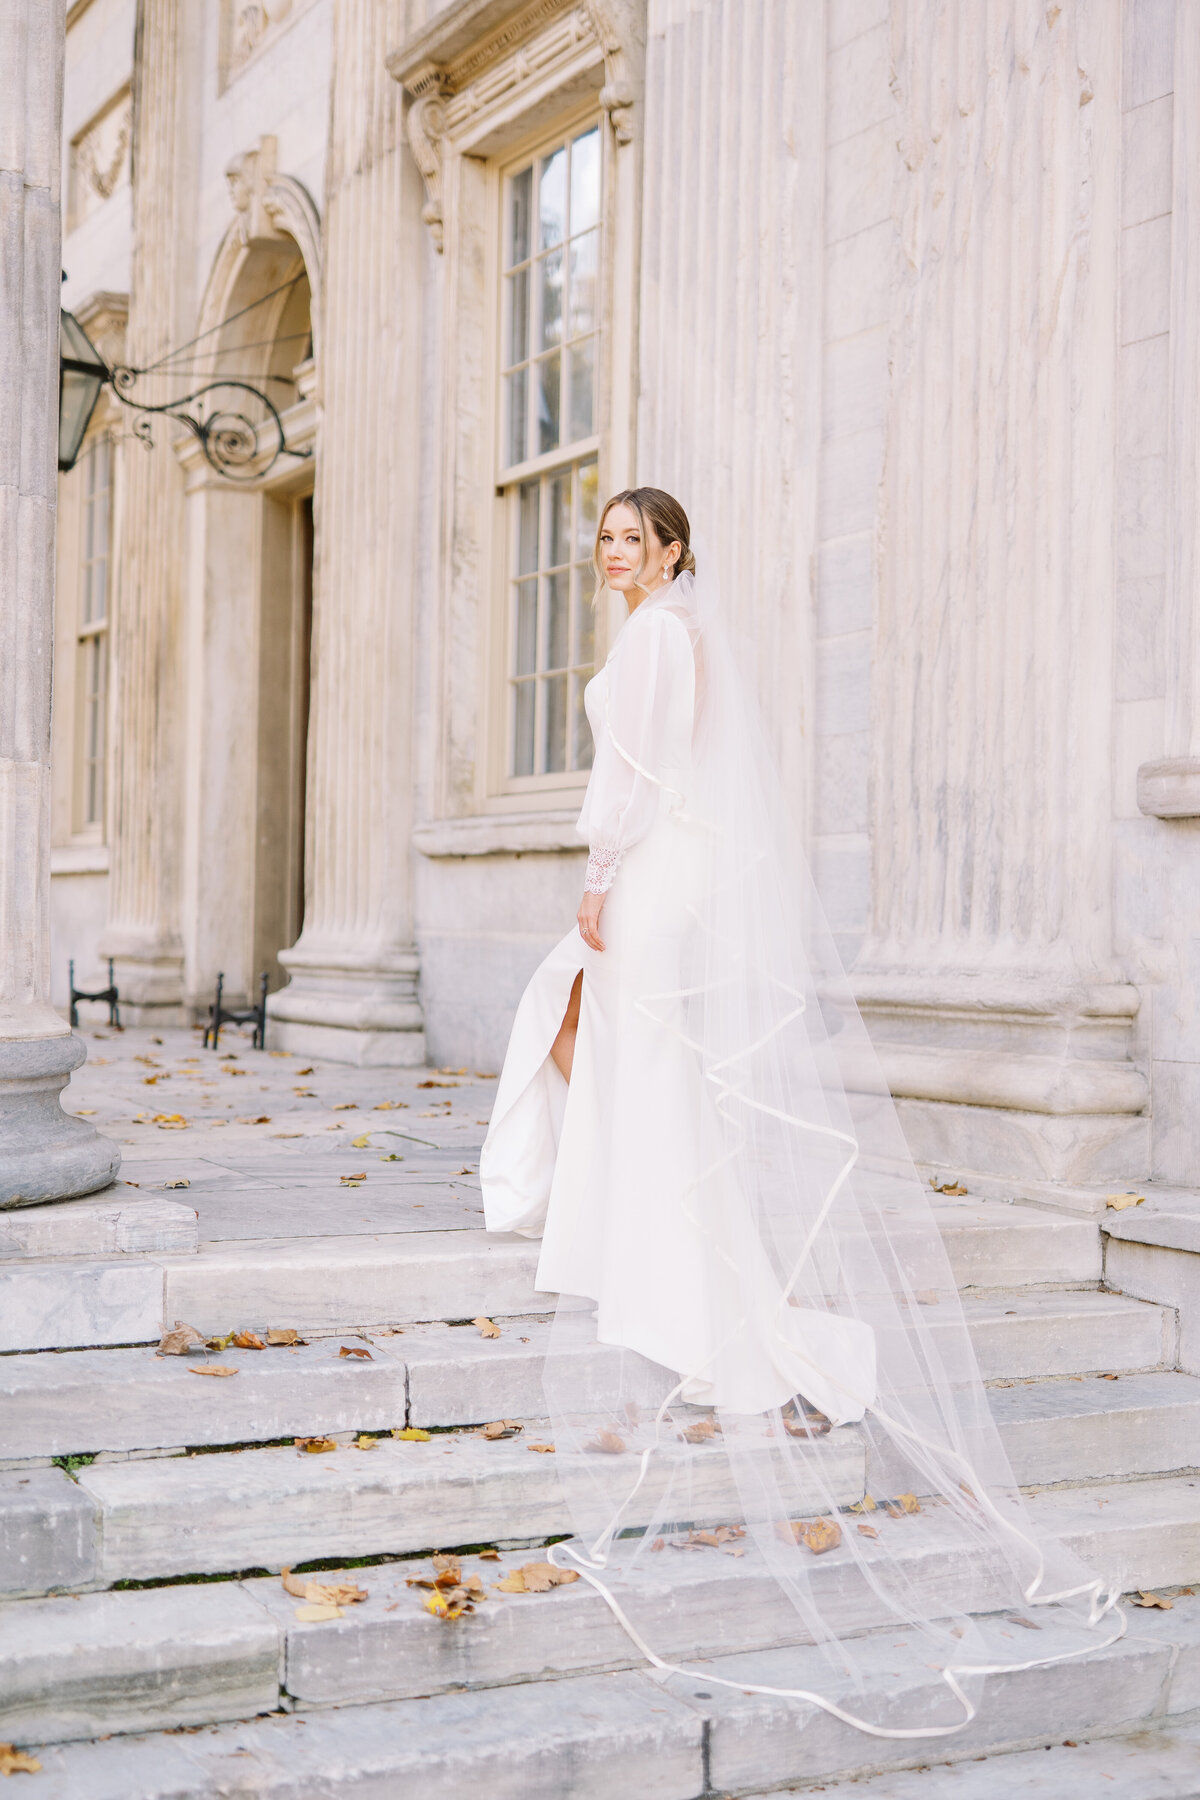 Bridal Portrait with long veil from BHLDN at the First Bank of the United States in Philadelphia, PA